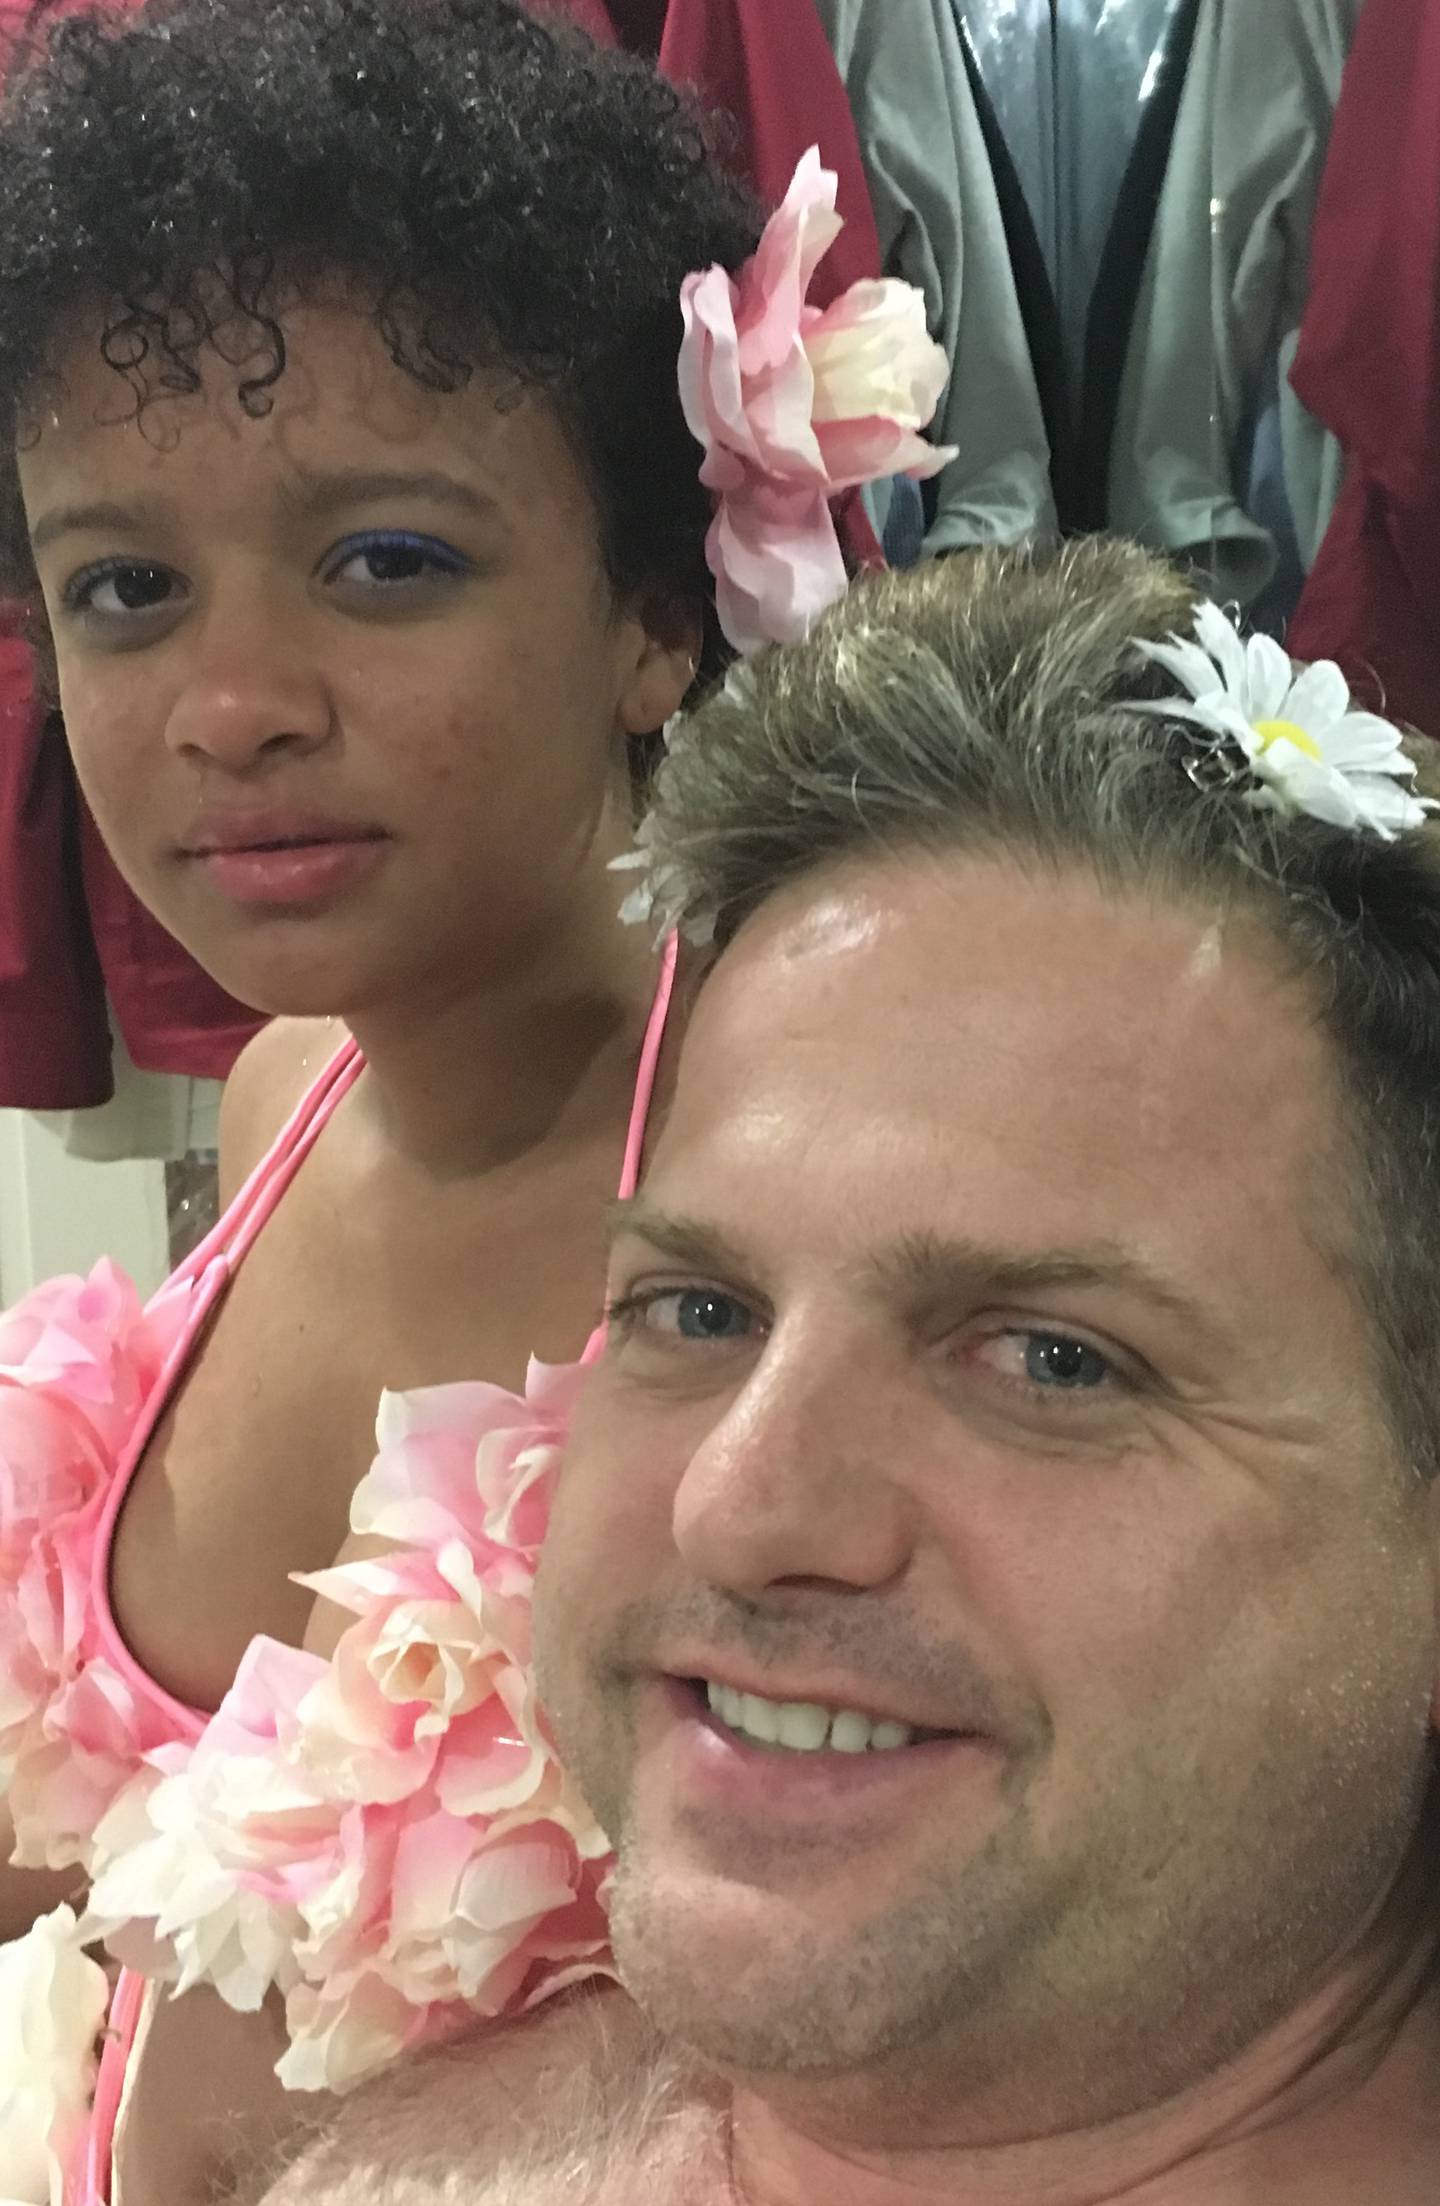 Sophie Reeder spent her last day at home gluing artificial flowers around her room. She put a daisy in her father Patrick Reeder's hair for this selfie.